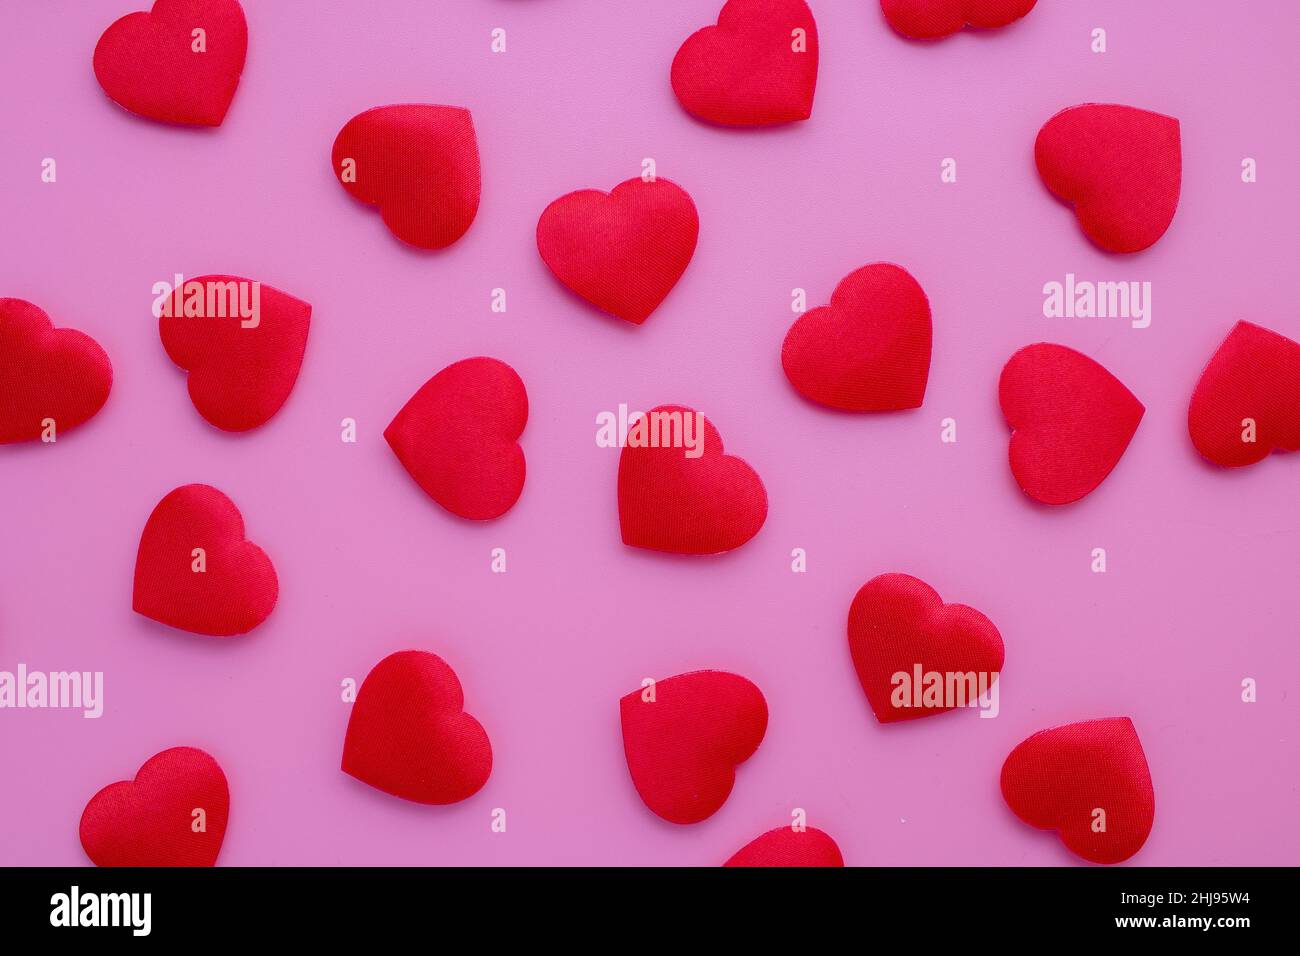 The magical paradise of hearts. Lots of perfectly shaped hearts are placed on a bright pink background. Made of fabric, stylish and romantic backgroun Stock Photo